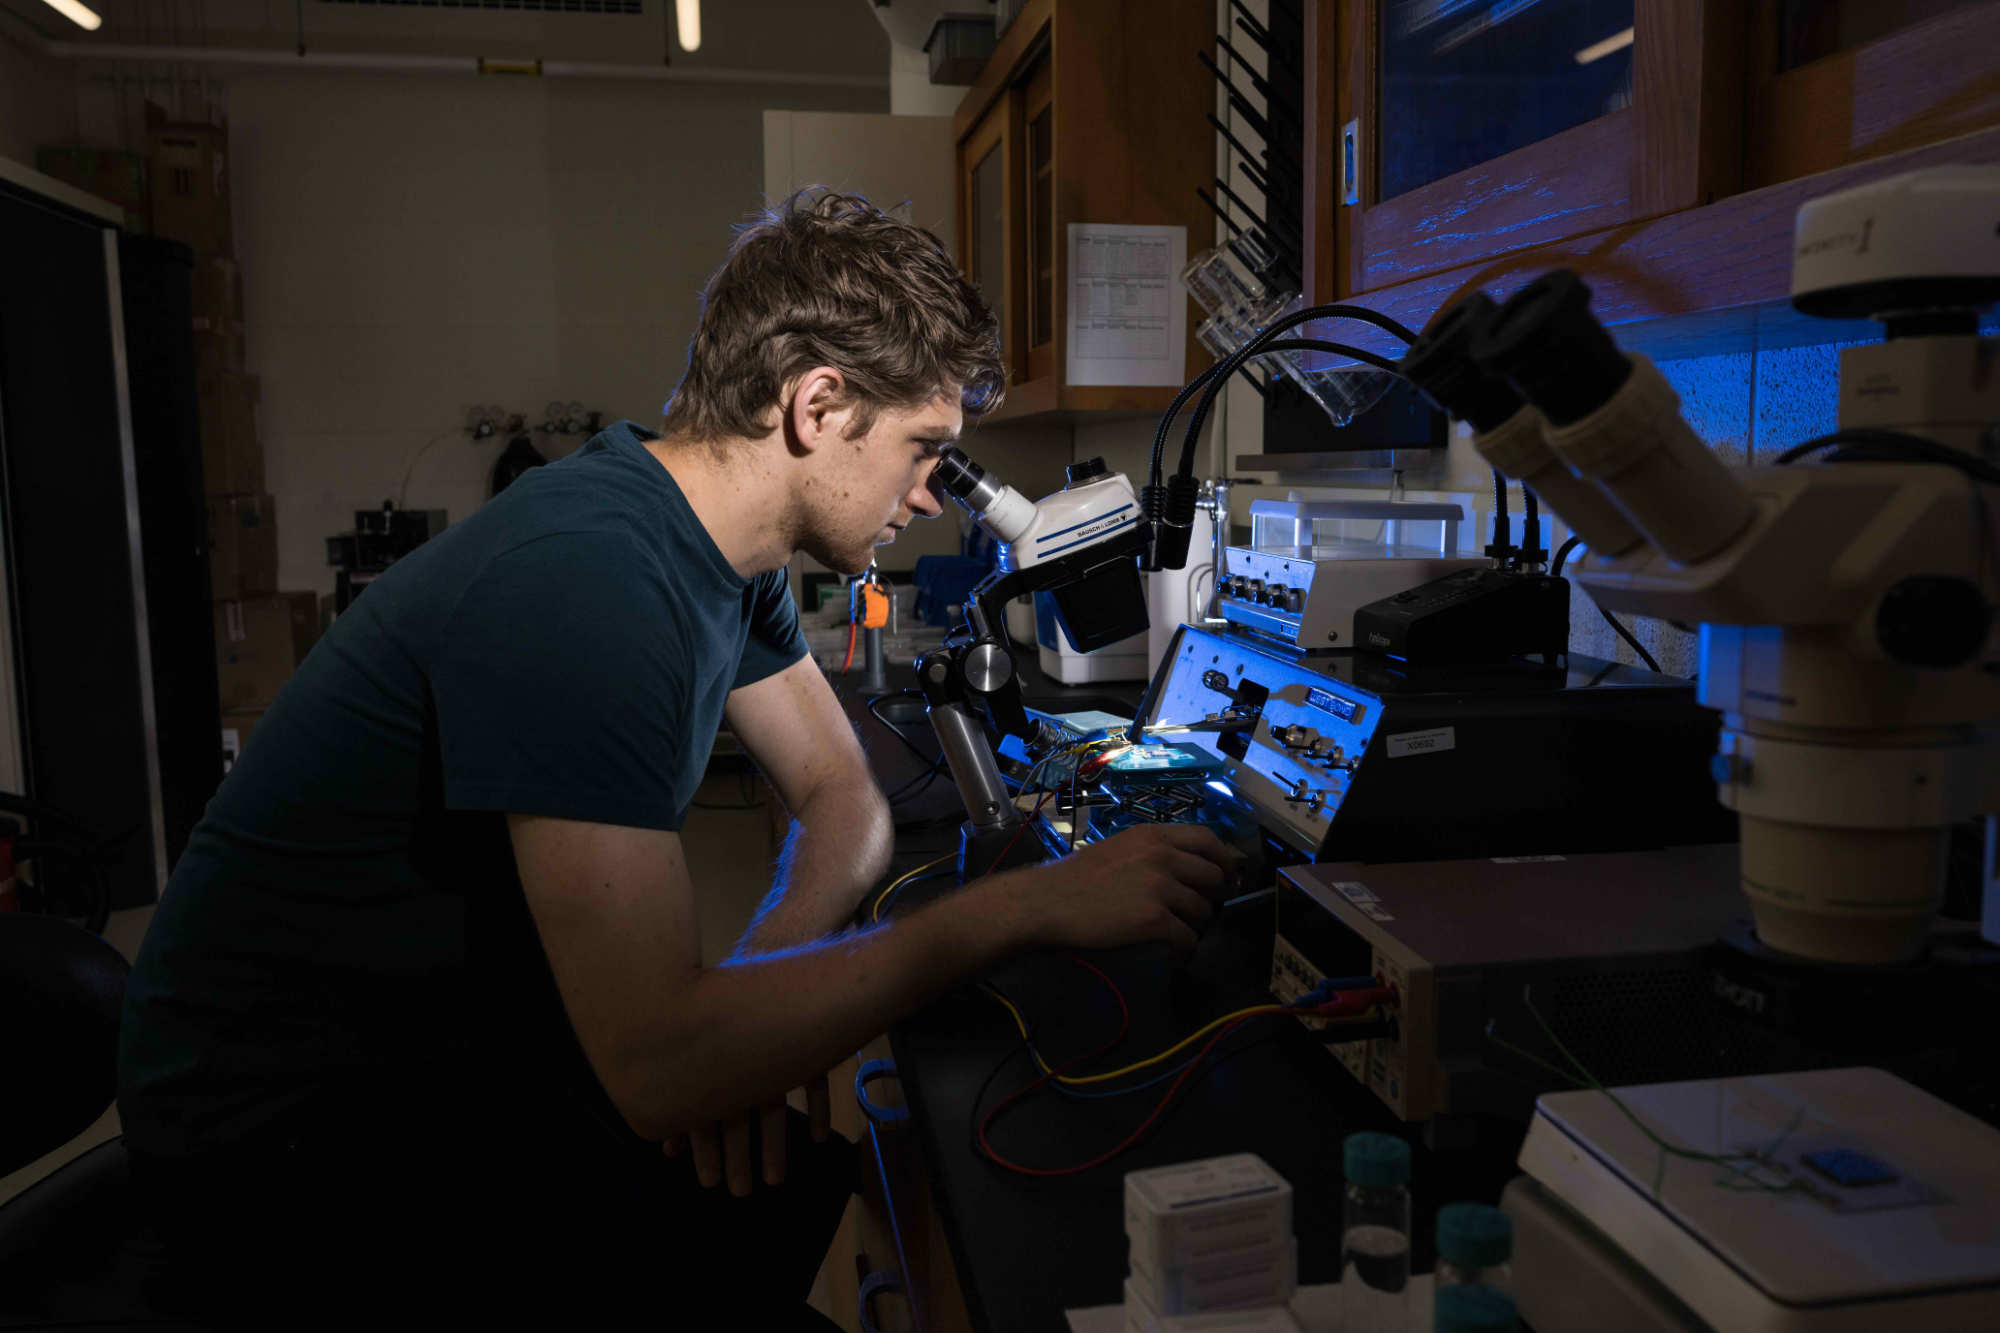 A graduate student doing nanoscale heat transfer mapping research peers into a microscope-like device while the screens and array in front of him are lit up with blue light.